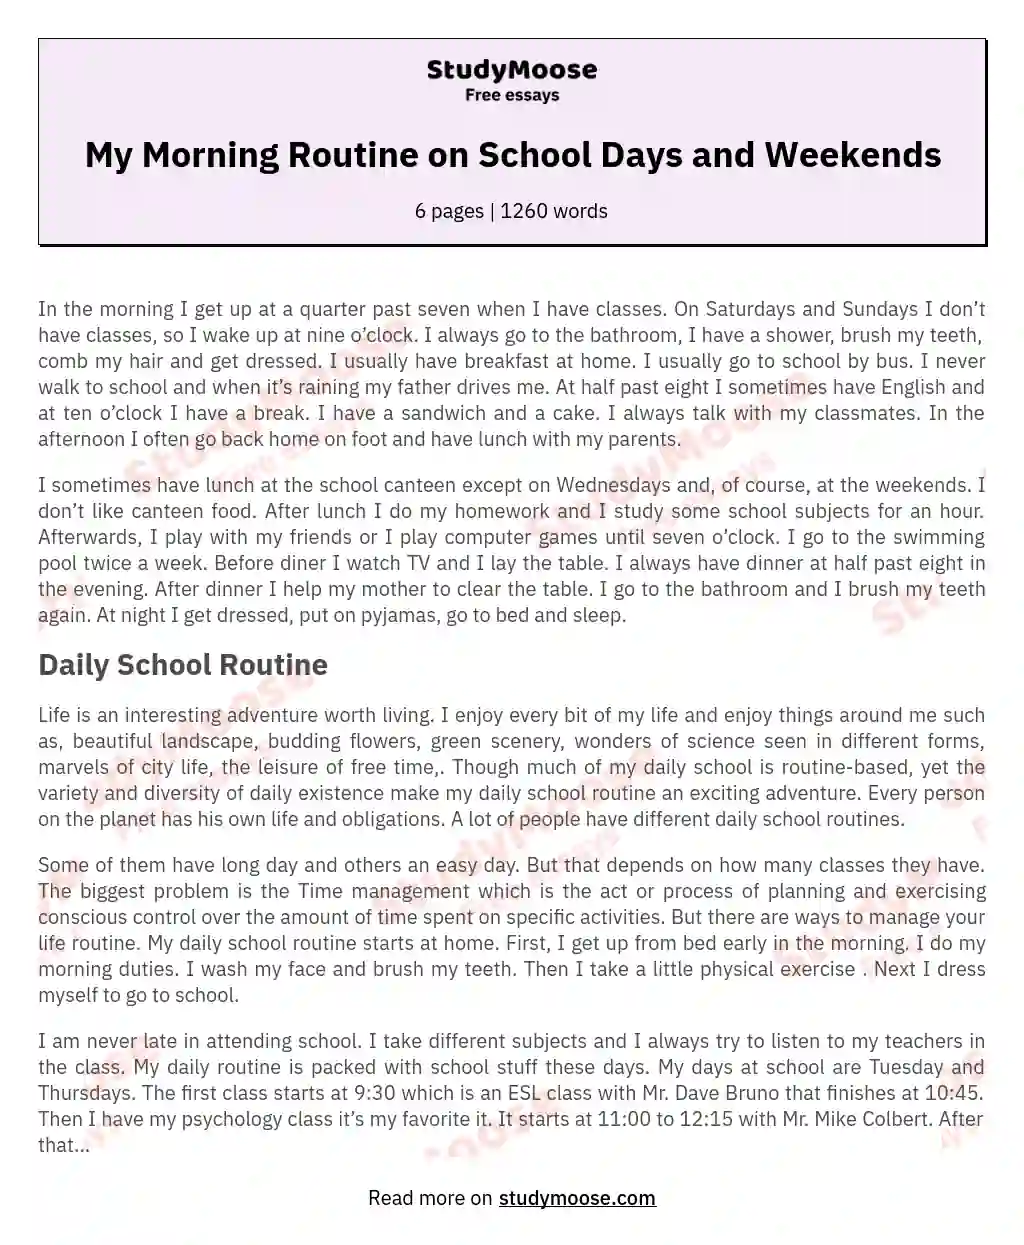 My Morning Routine on School Days and Weekends essay